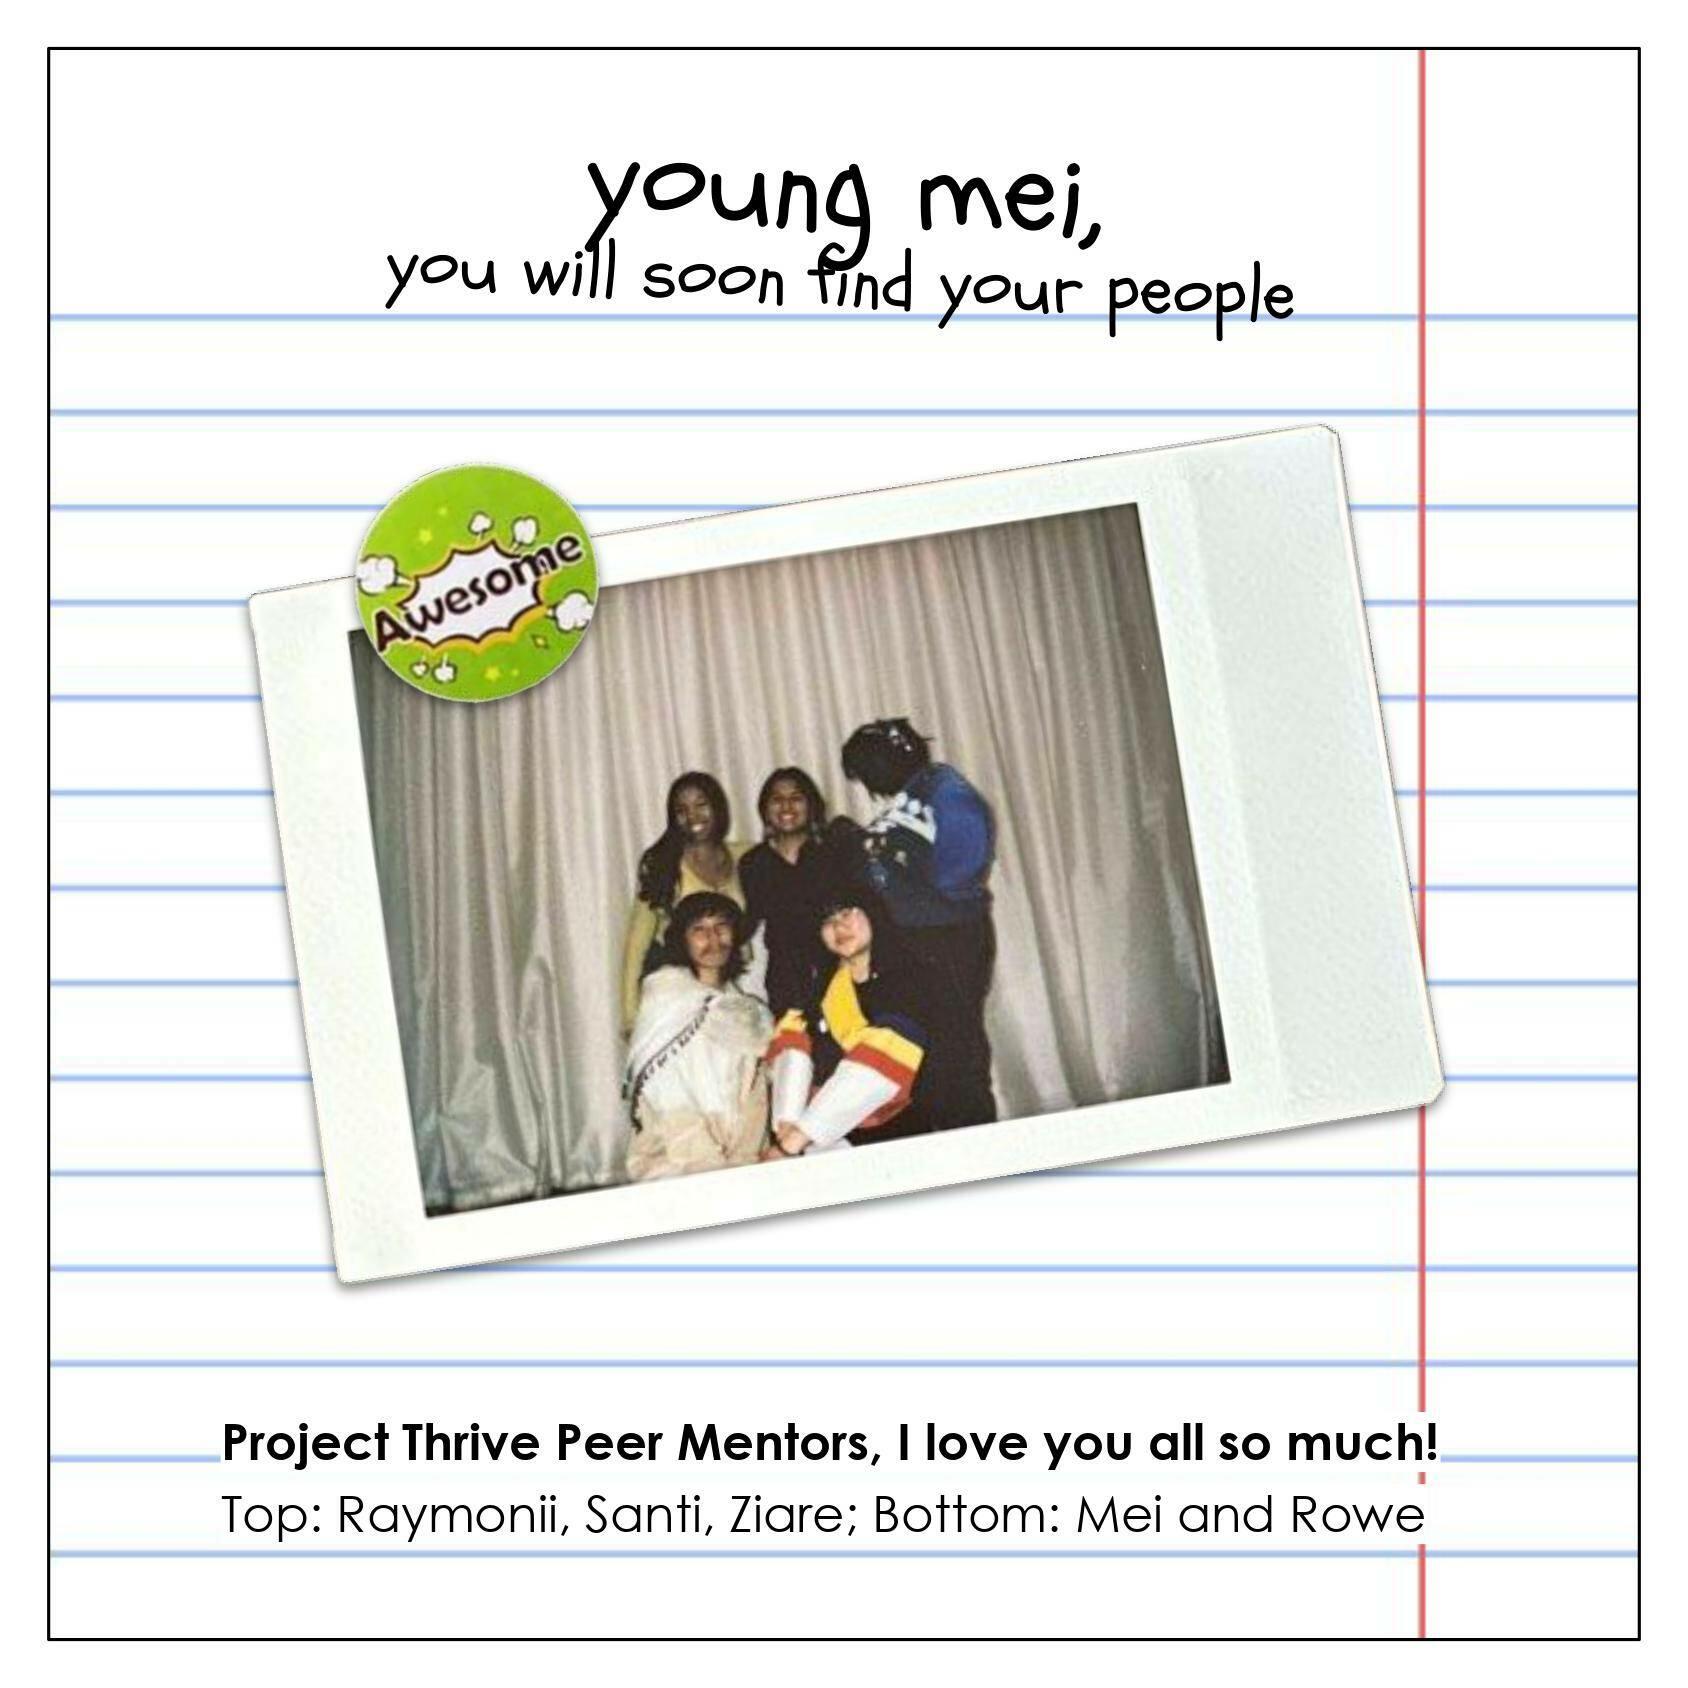 A polaroid depicting five first-generation college students together smiling in front of a tan curtain. Text reads, "young mei, you will soon find your people." Below, "Project Thrive Peer Mentors, I love you all so much!"